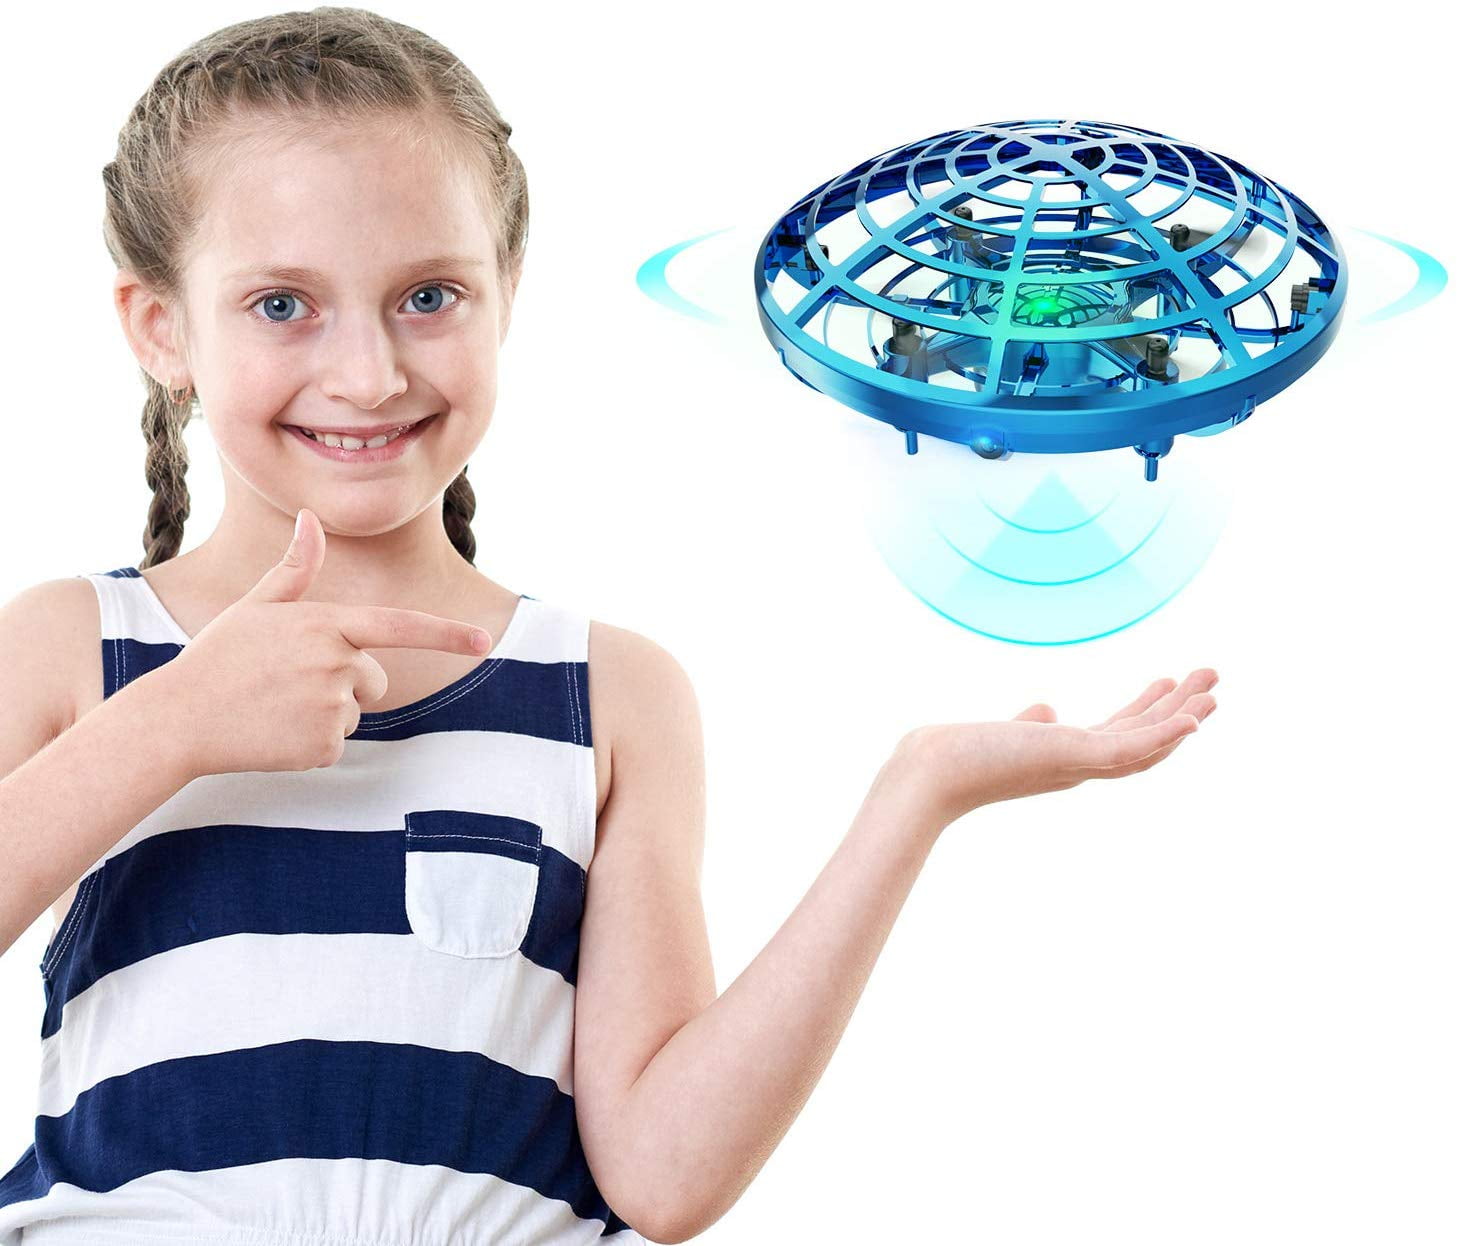 LOLO Hand Operated Drone Flying Toys for Kids Adults,Flying Ball Drones Mini Drones with LED Lights,Helicopter Ball for Boys Girls Indoor Outdoor Red